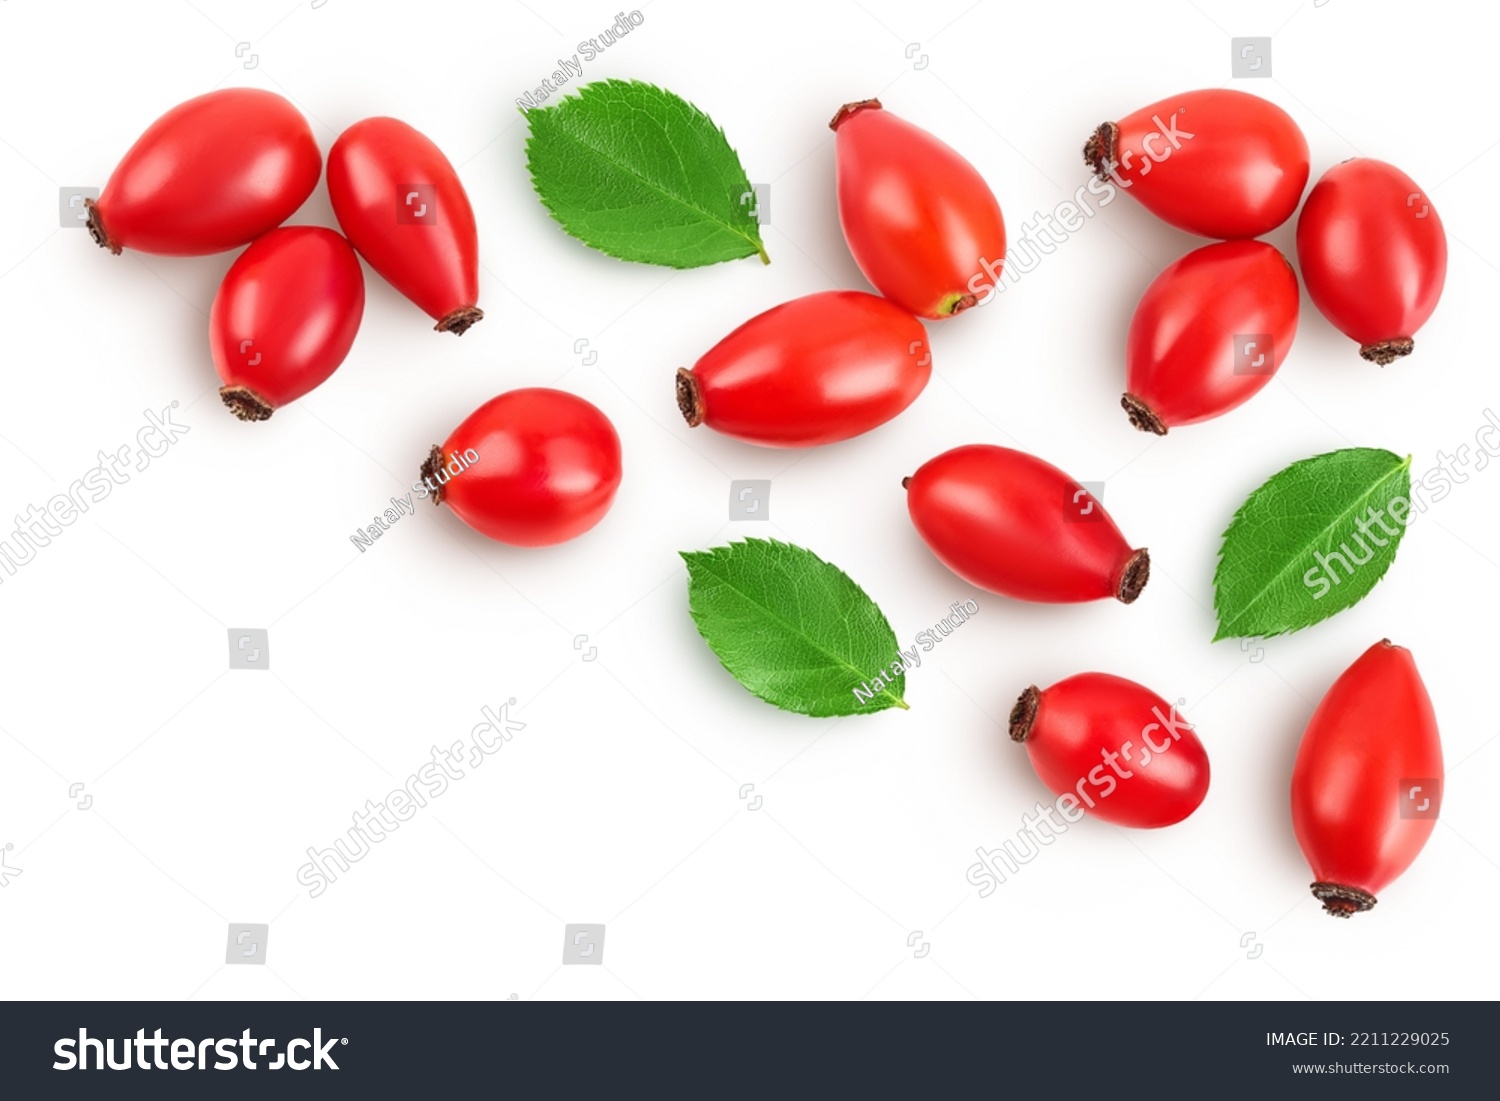 Rose hip isolated on a white background with full depth of field. Top view with copy space for your text. Flat lay. #2211229025